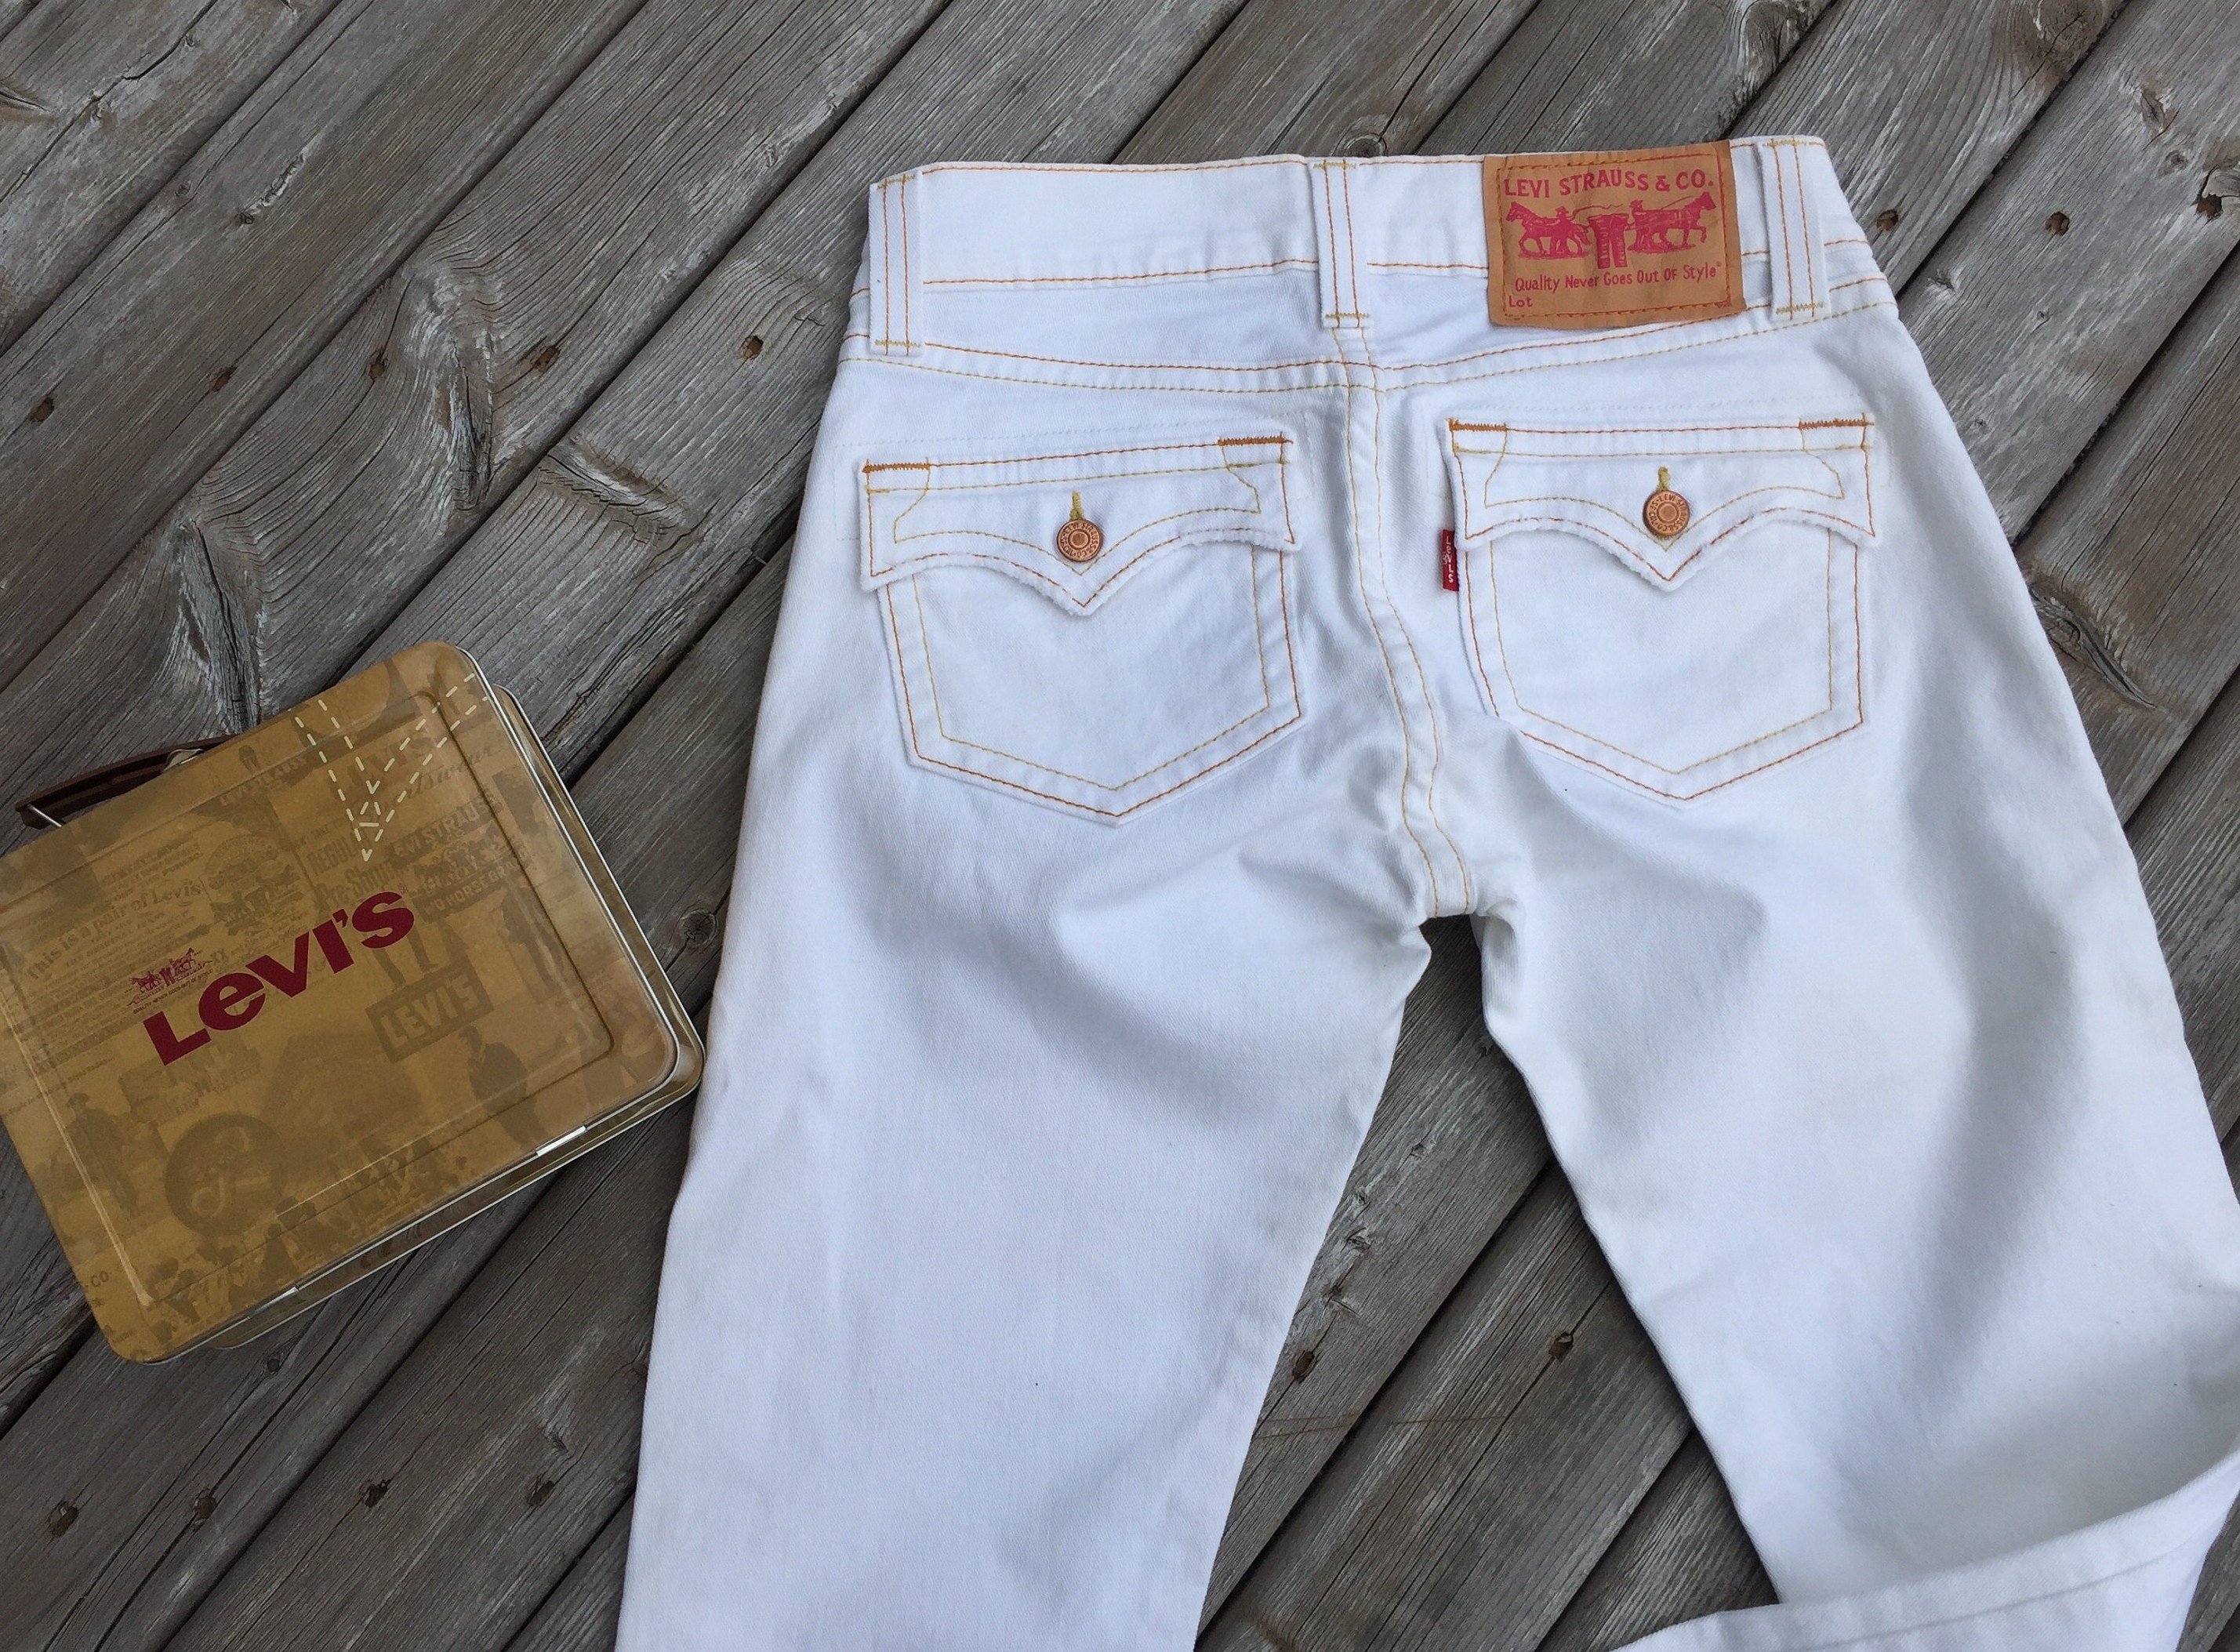 LEVI STRAUSS Slouch White 504 JEANS Slim Fit Flare Leg - Etsy